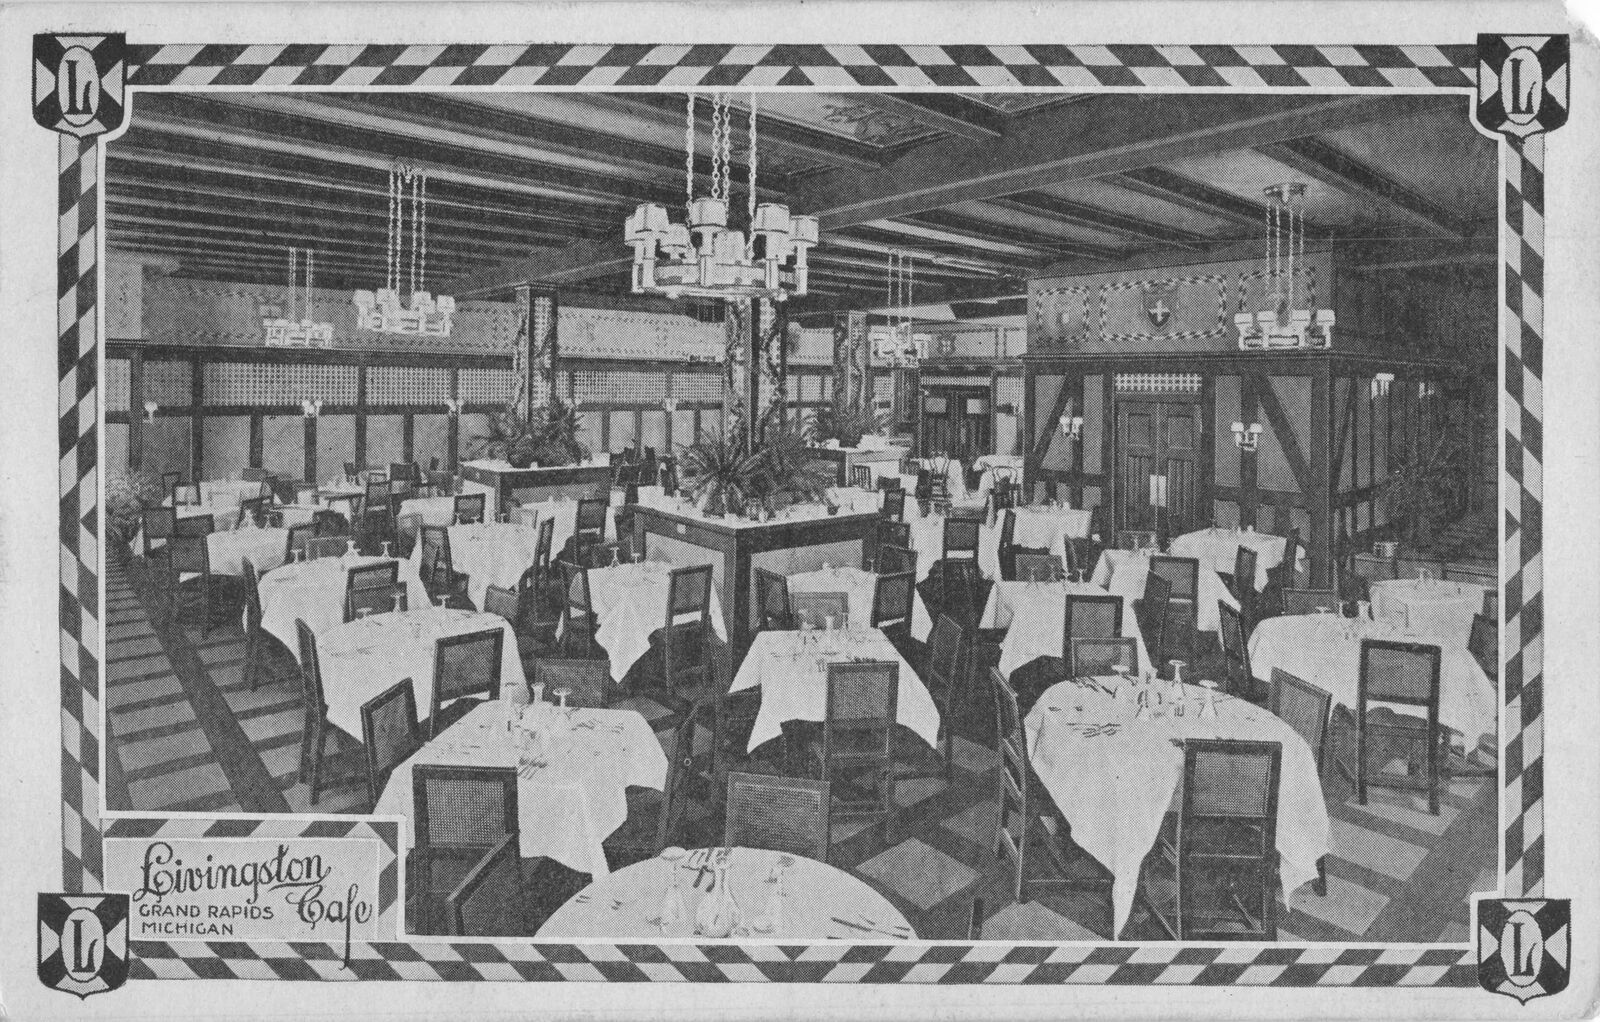 SW Grand Rapids MI INTERIOR FORMAL DINING the LIVINGSTON HOTEL BEFORE THE FIRE